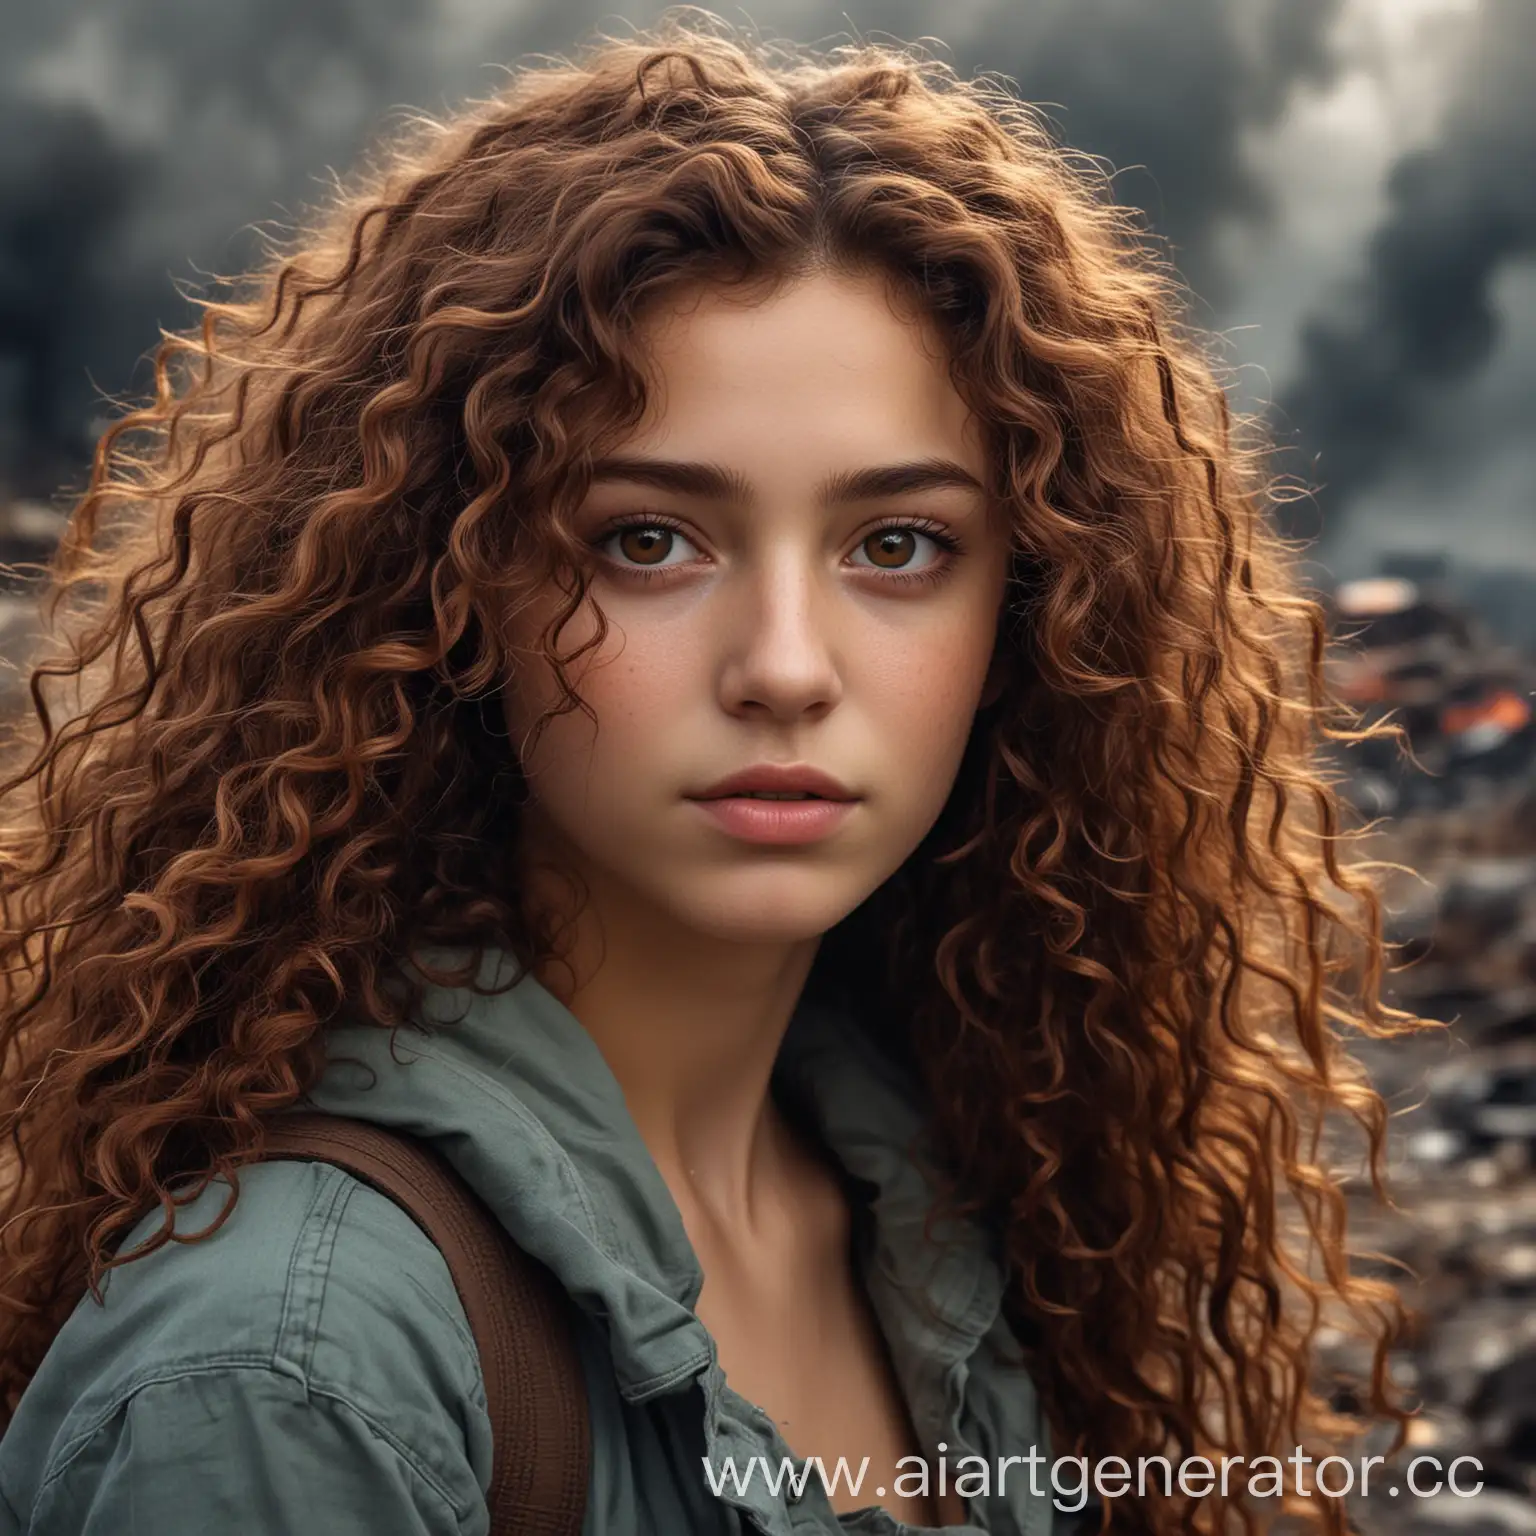 Girl-with-Chestnut-Curly-Long-Hair-in-Apocalyptic-Setting